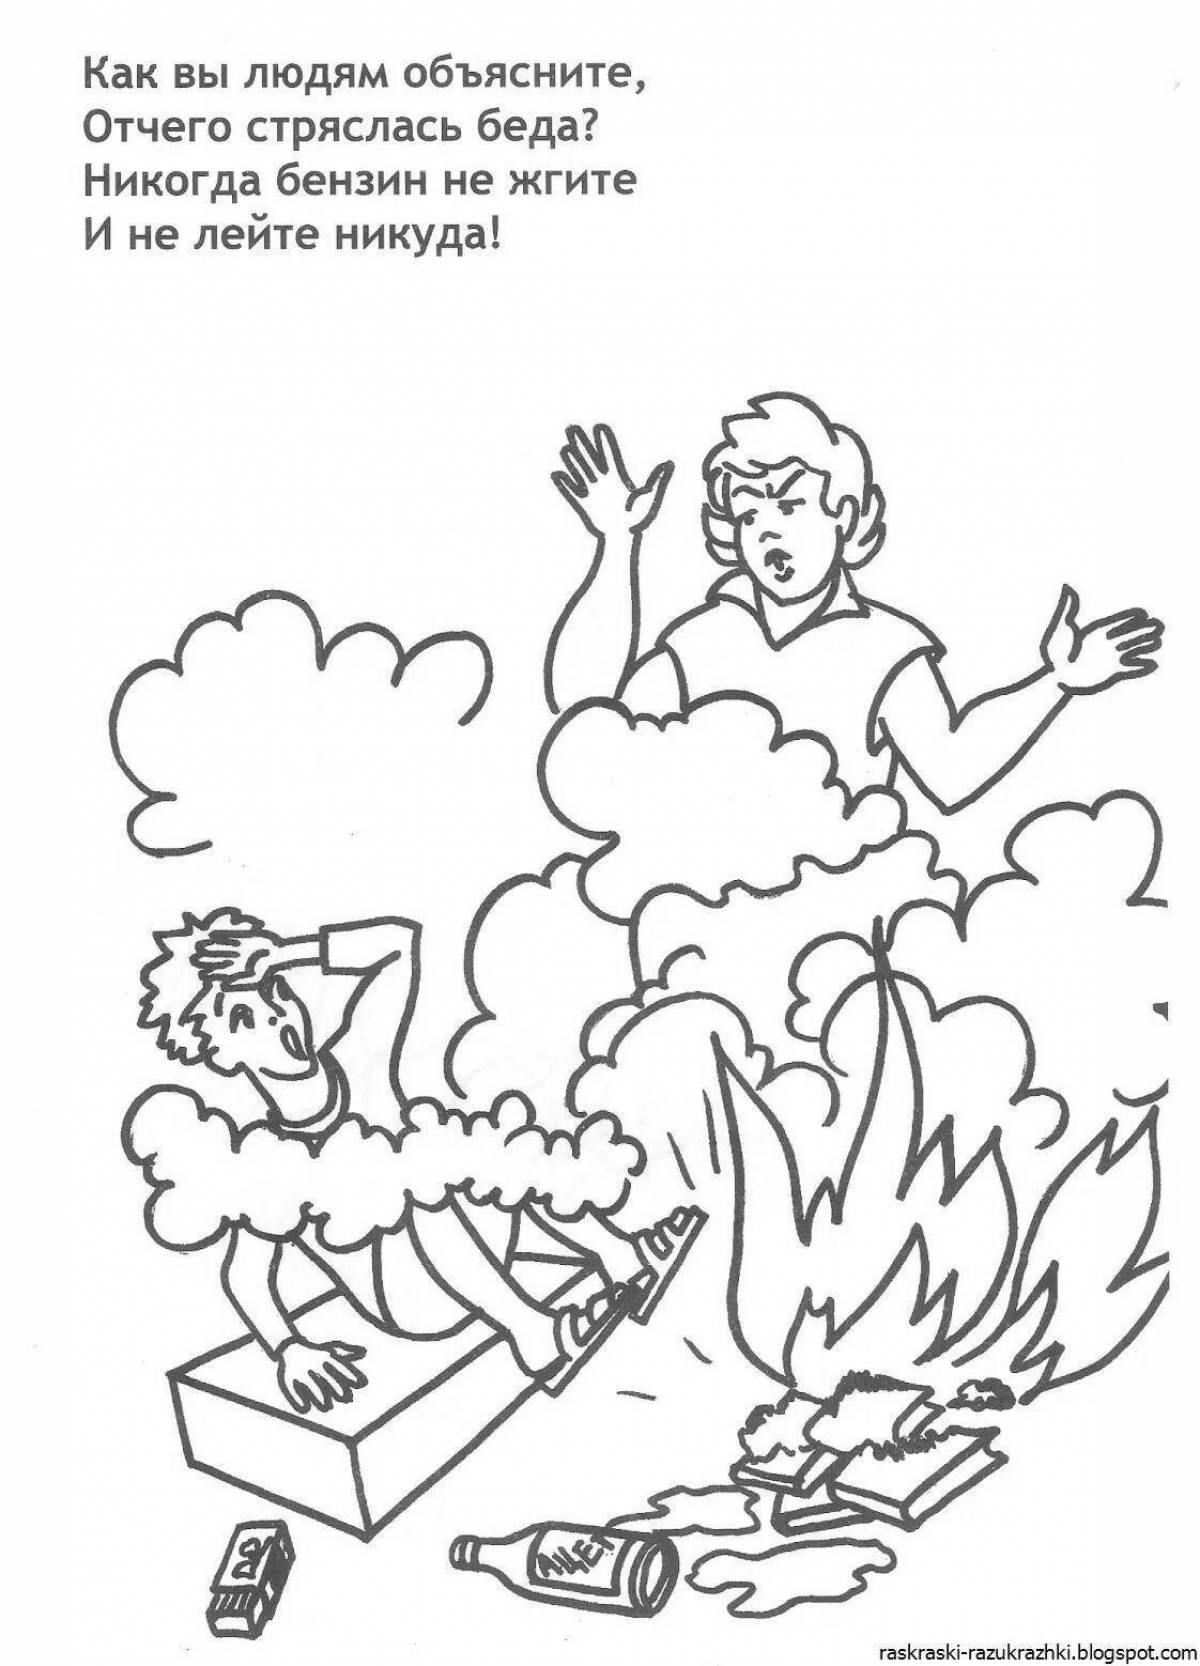 Fun fire safety coloring page